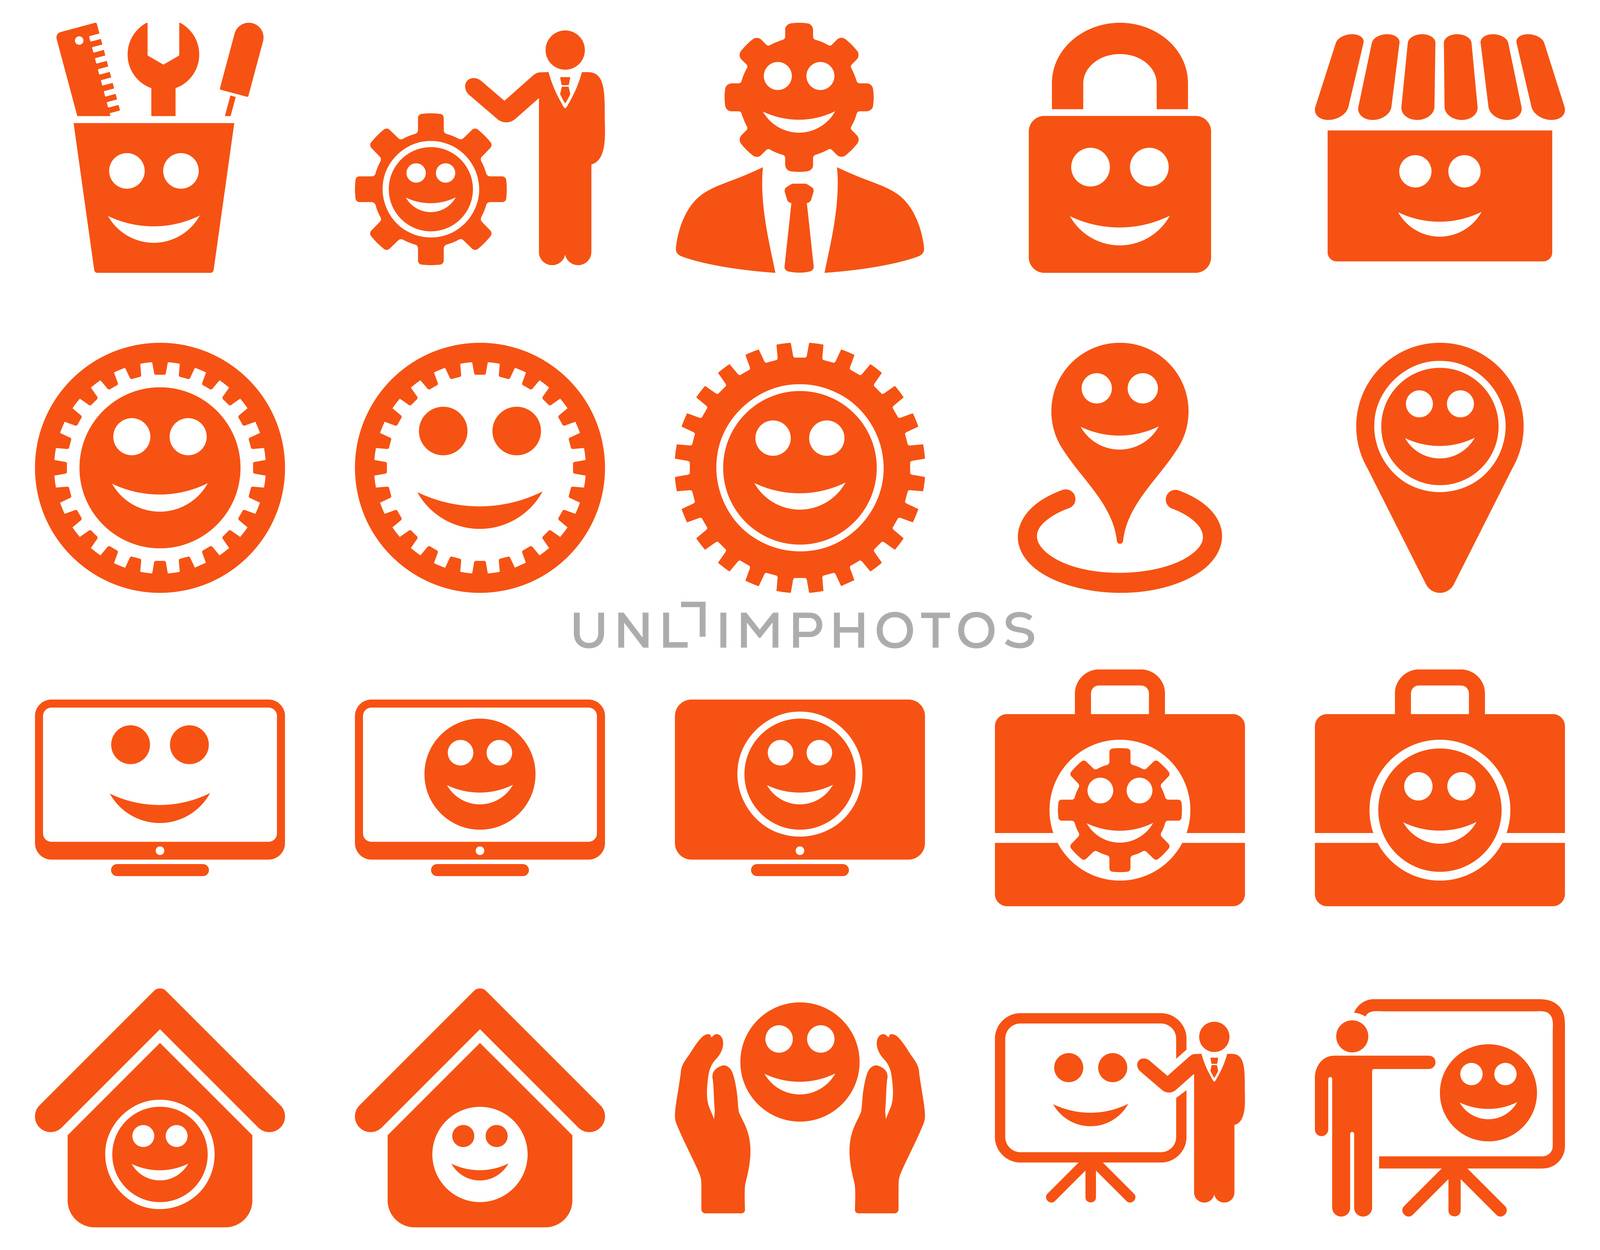 Tools, gears, smiles, management icons. Glyph set style is flat images, orange symbols, isolated on a white background.